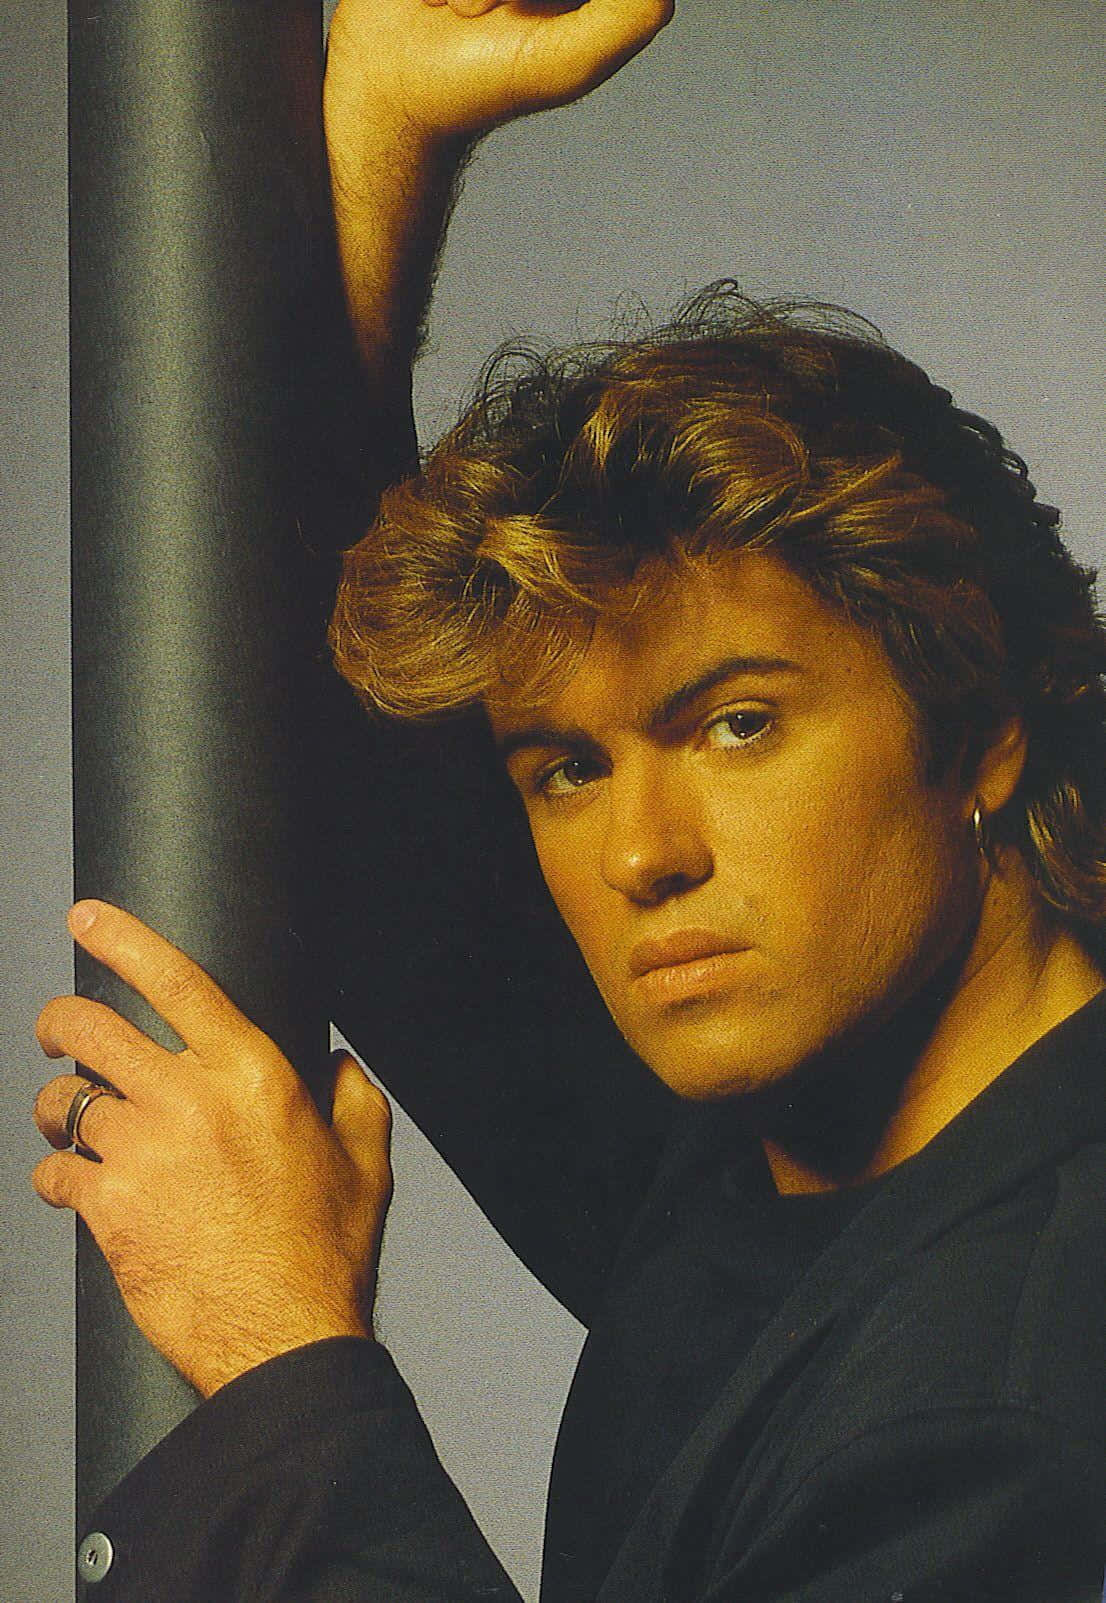 George Michael in one of his legendary music videos Wallpaper